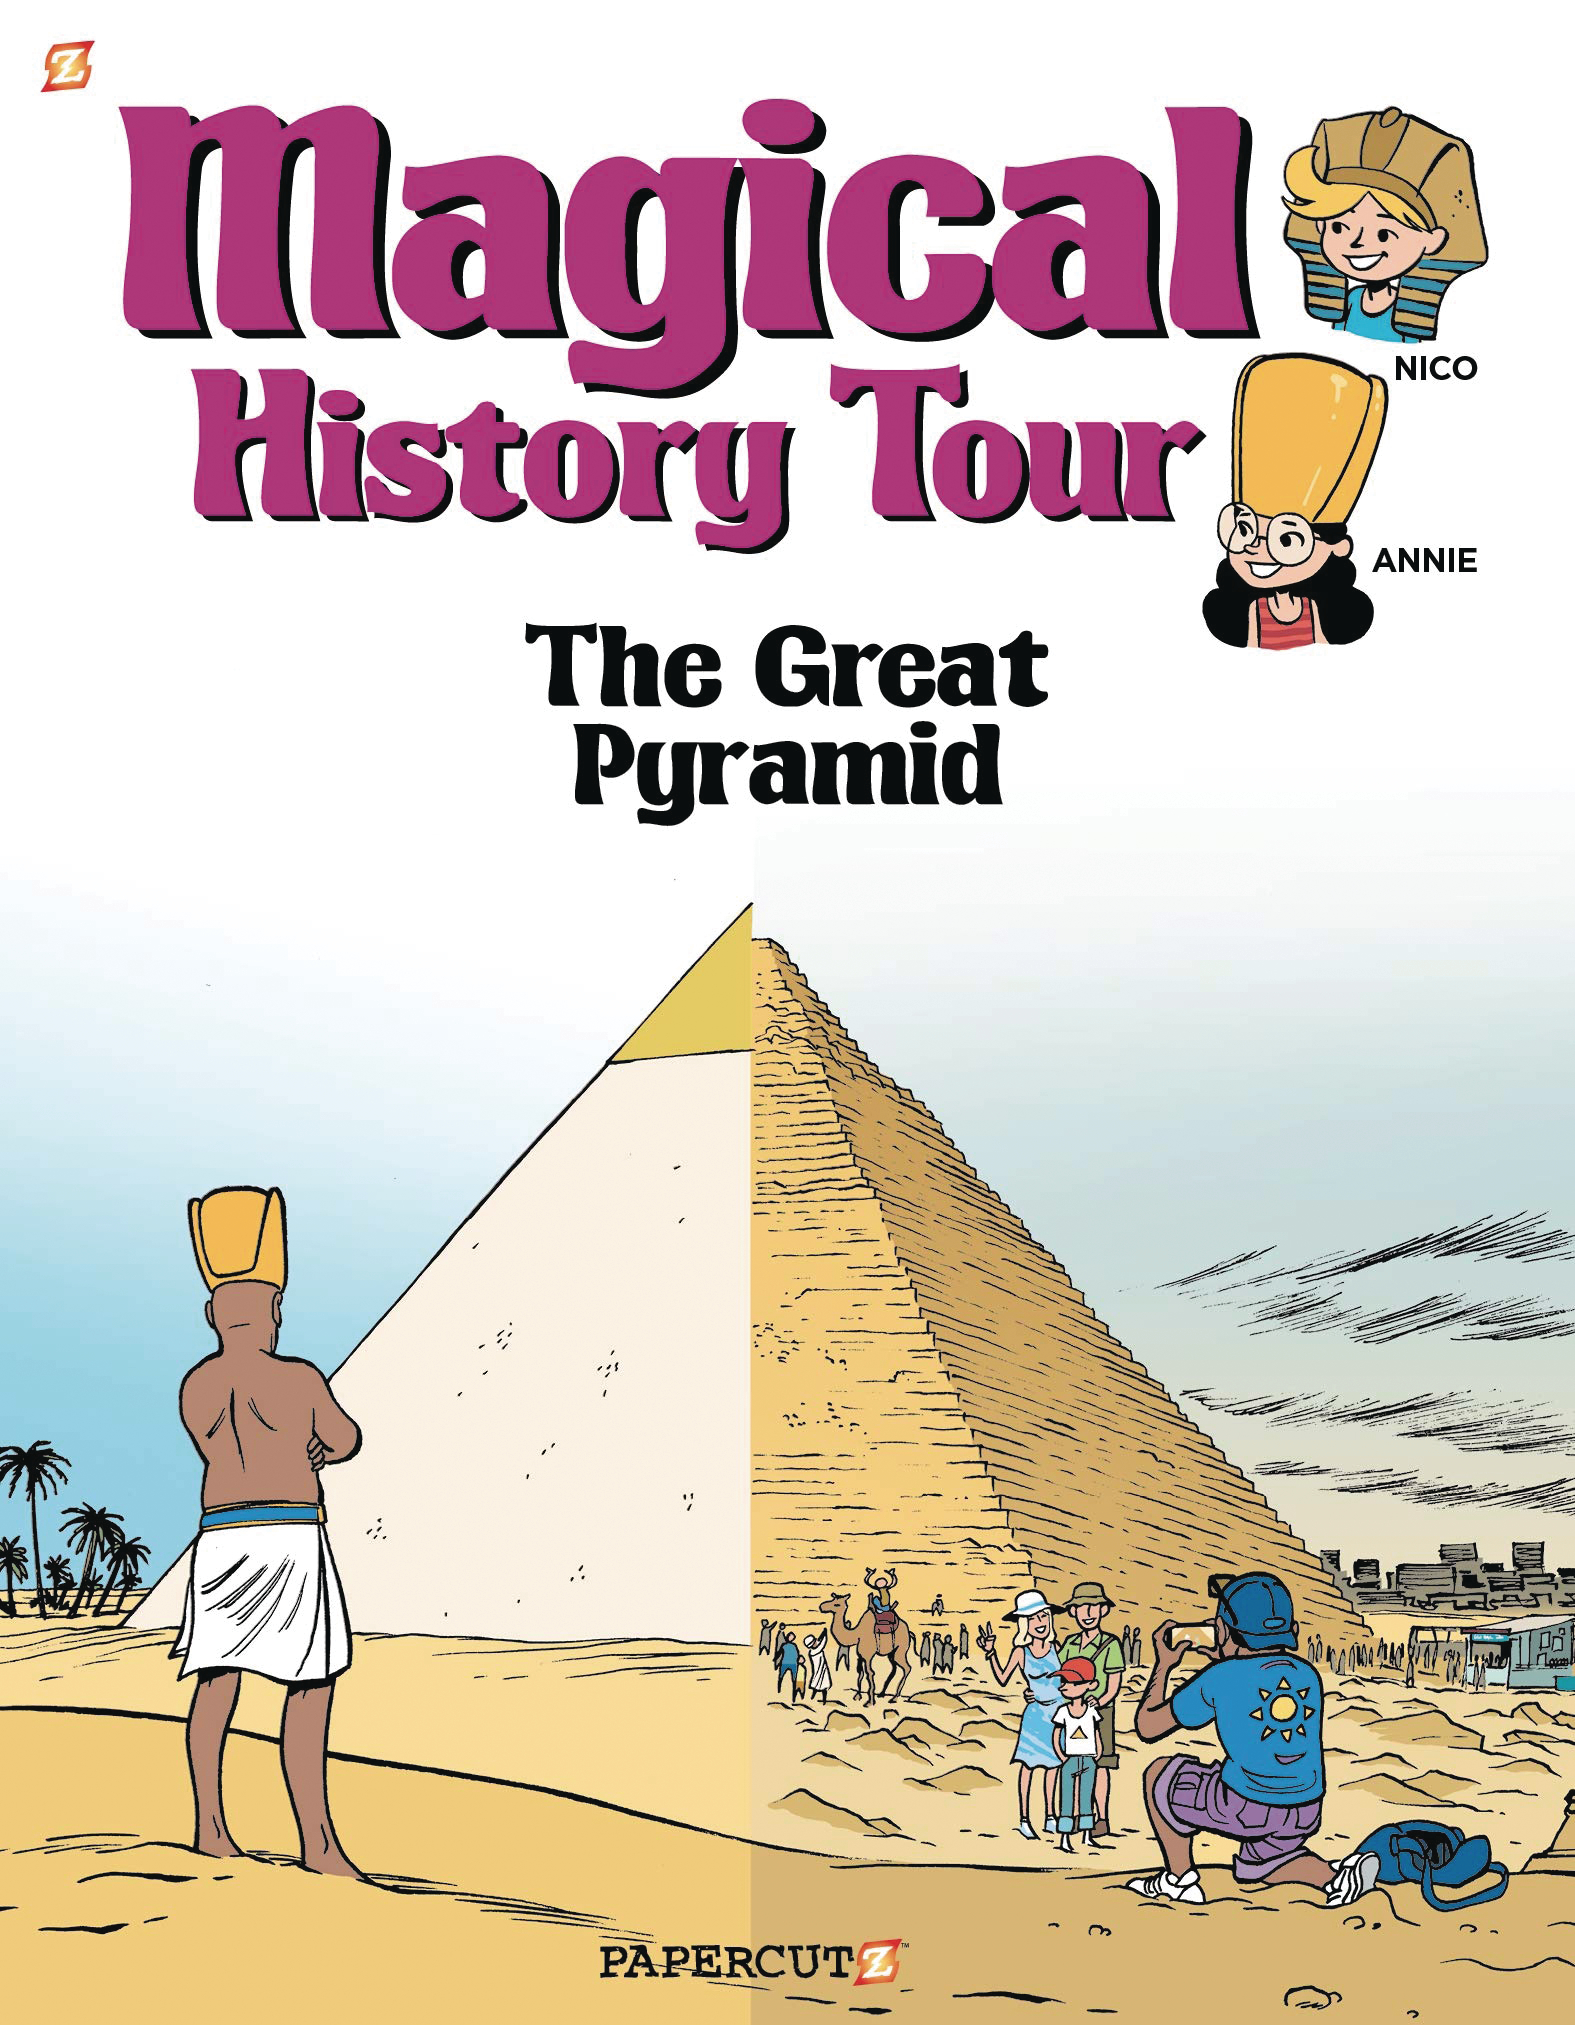 Magical History Tour Hardcover Graphic Novel Volume 1 Great Pyramid